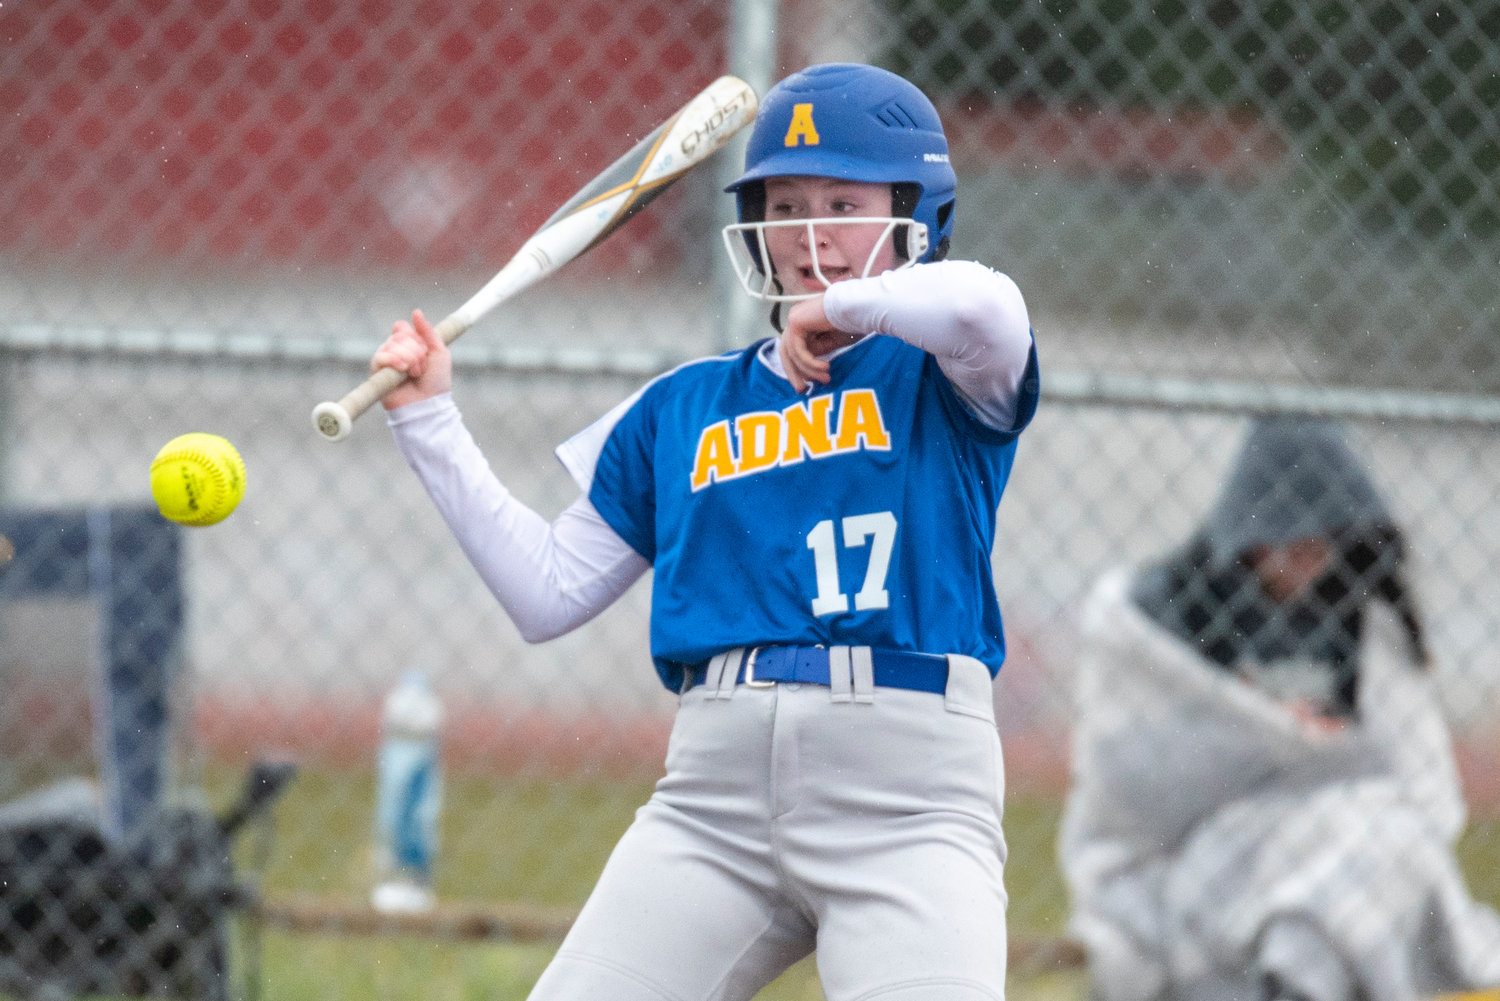 Adna's Julianna Farmer dodges a Winlock pitch during a game at Winlock on April 20.